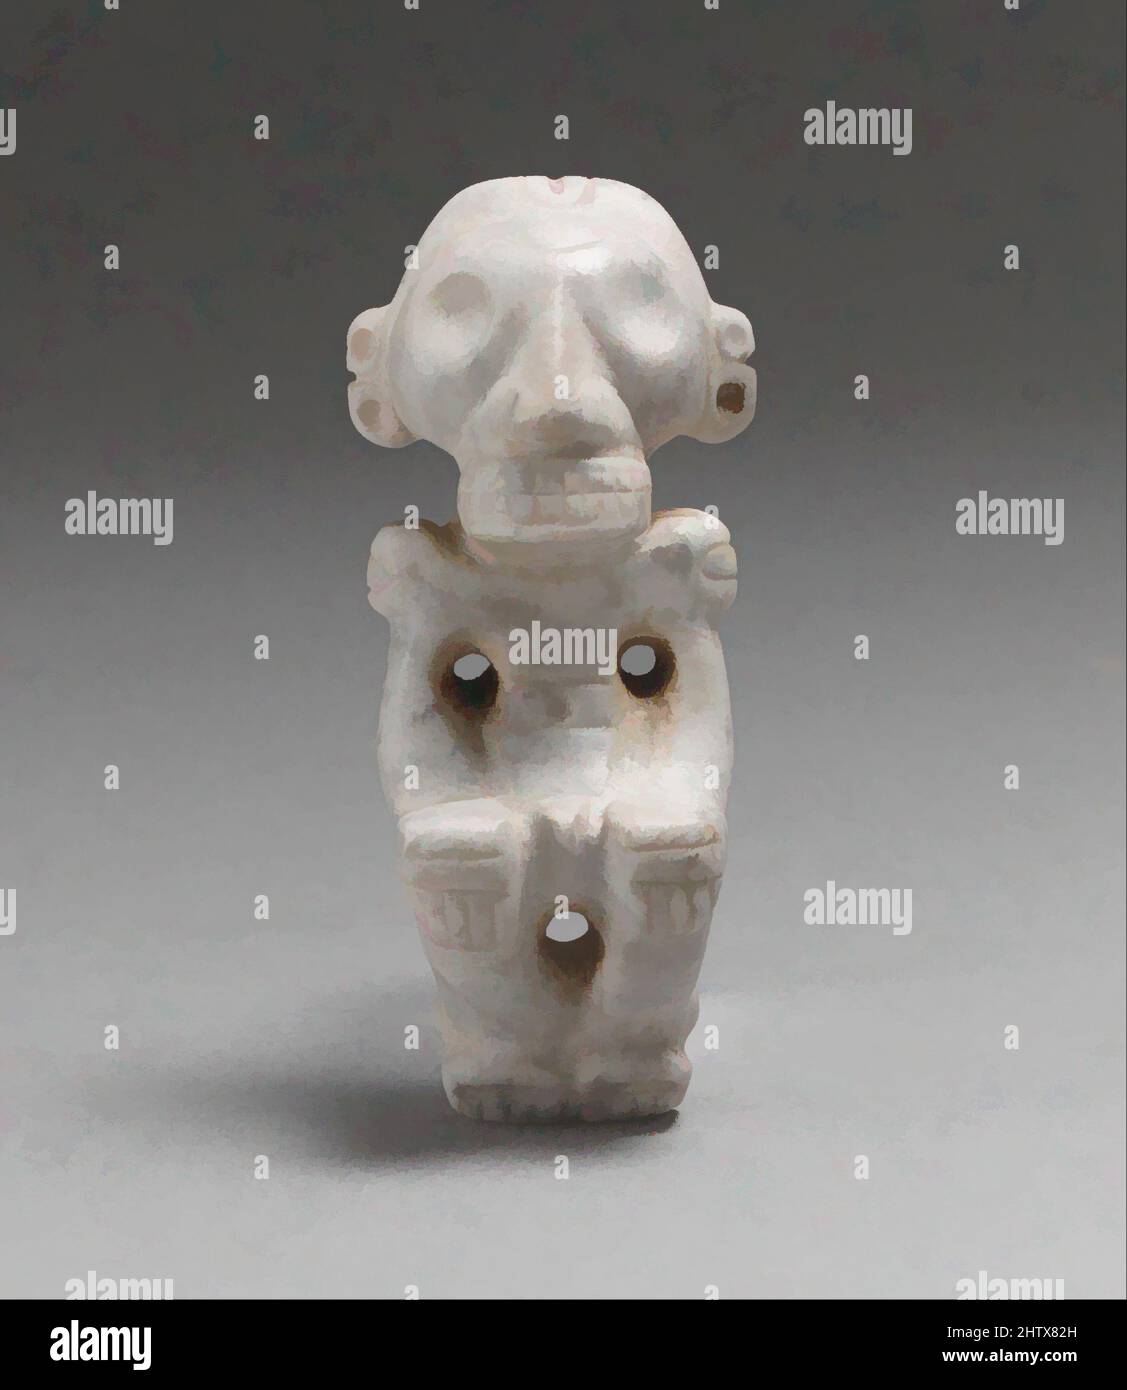 Art inspired by Pendant Figure, 13th–15th century, Dominican Republic, Caribbean, Distrito Nacional, La Caleta, reportedly, Taino, Stone, H. 3 x W. 1 1/4 x D. 1 1/4 in., Stone-Ornaments, Death imagery in the form of skeletal figures and skulls with deep eye sockets and huge grimacing, Classic works modernized by Artotop with a splash of modernity. Shapes, color and value, eye-catching visual impact on art. Emotions through freedom of artworks in a contemporary way. A timeless message pursuing a wildly creative new direction. Artists turning to the digital medium and creating the Artotop NFT Stock Photo